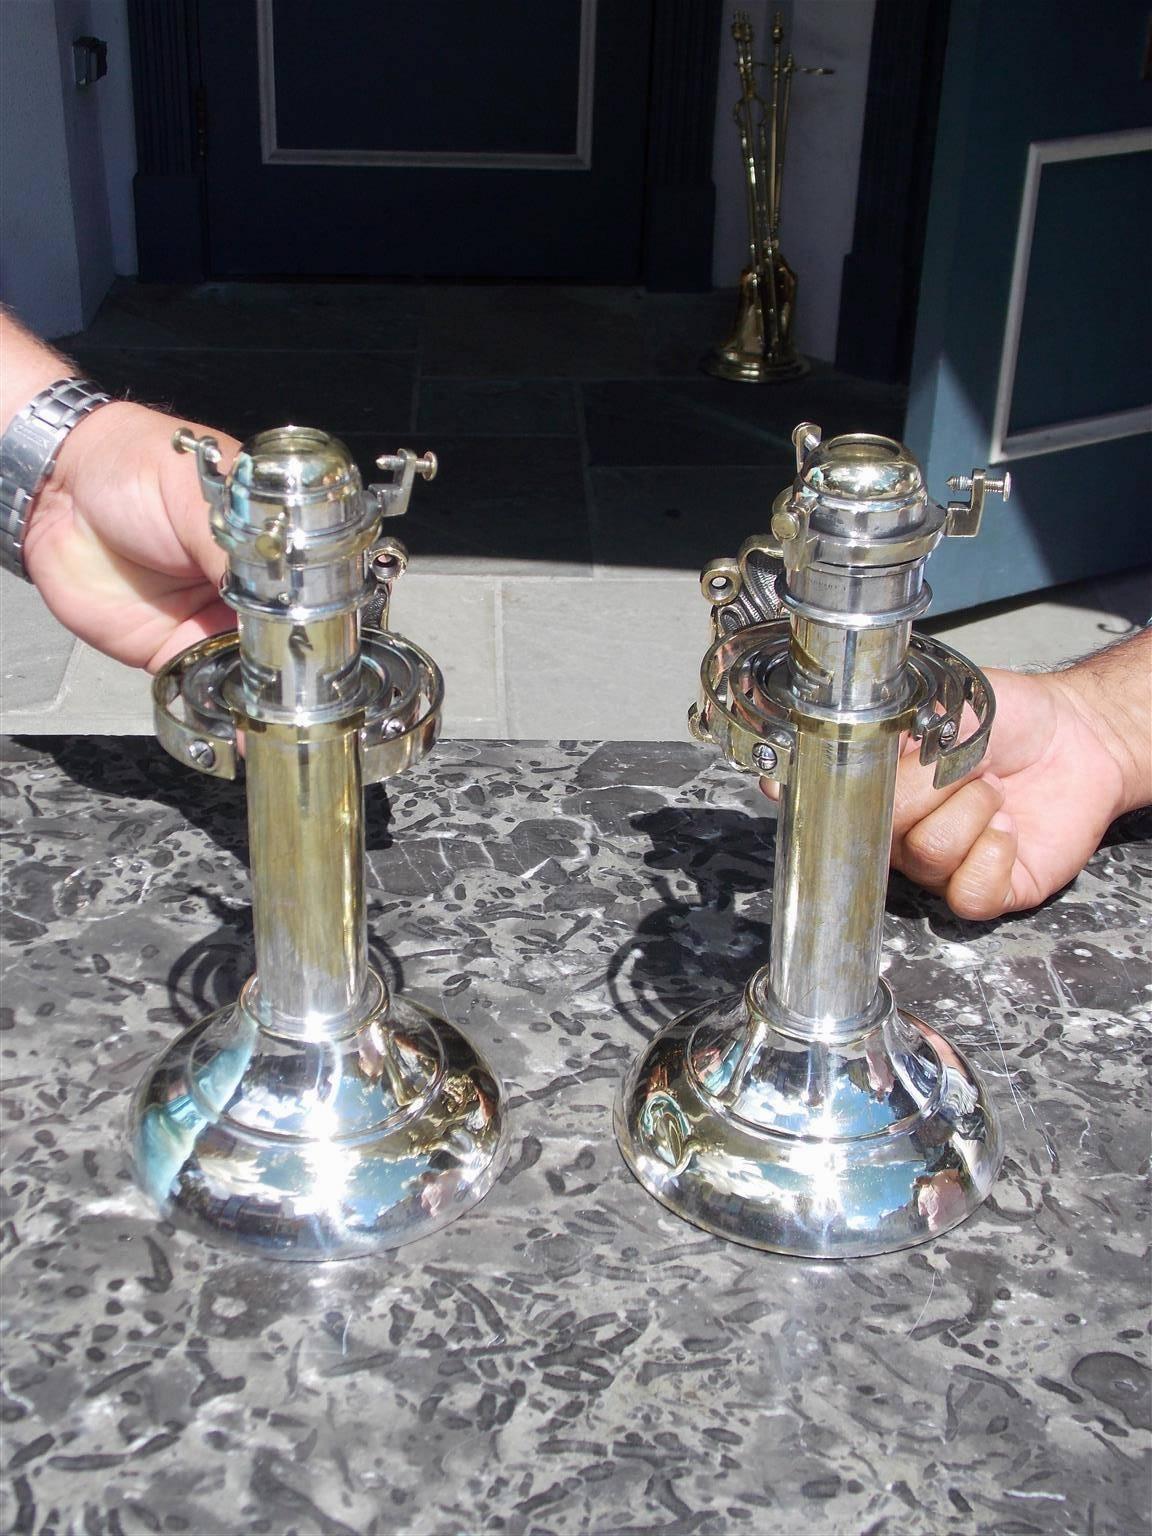 Mid-19th Century Pair of American Nautical Gimbaled Nickel Silver & Brass Wall Sconces, C. 1850 For Sale